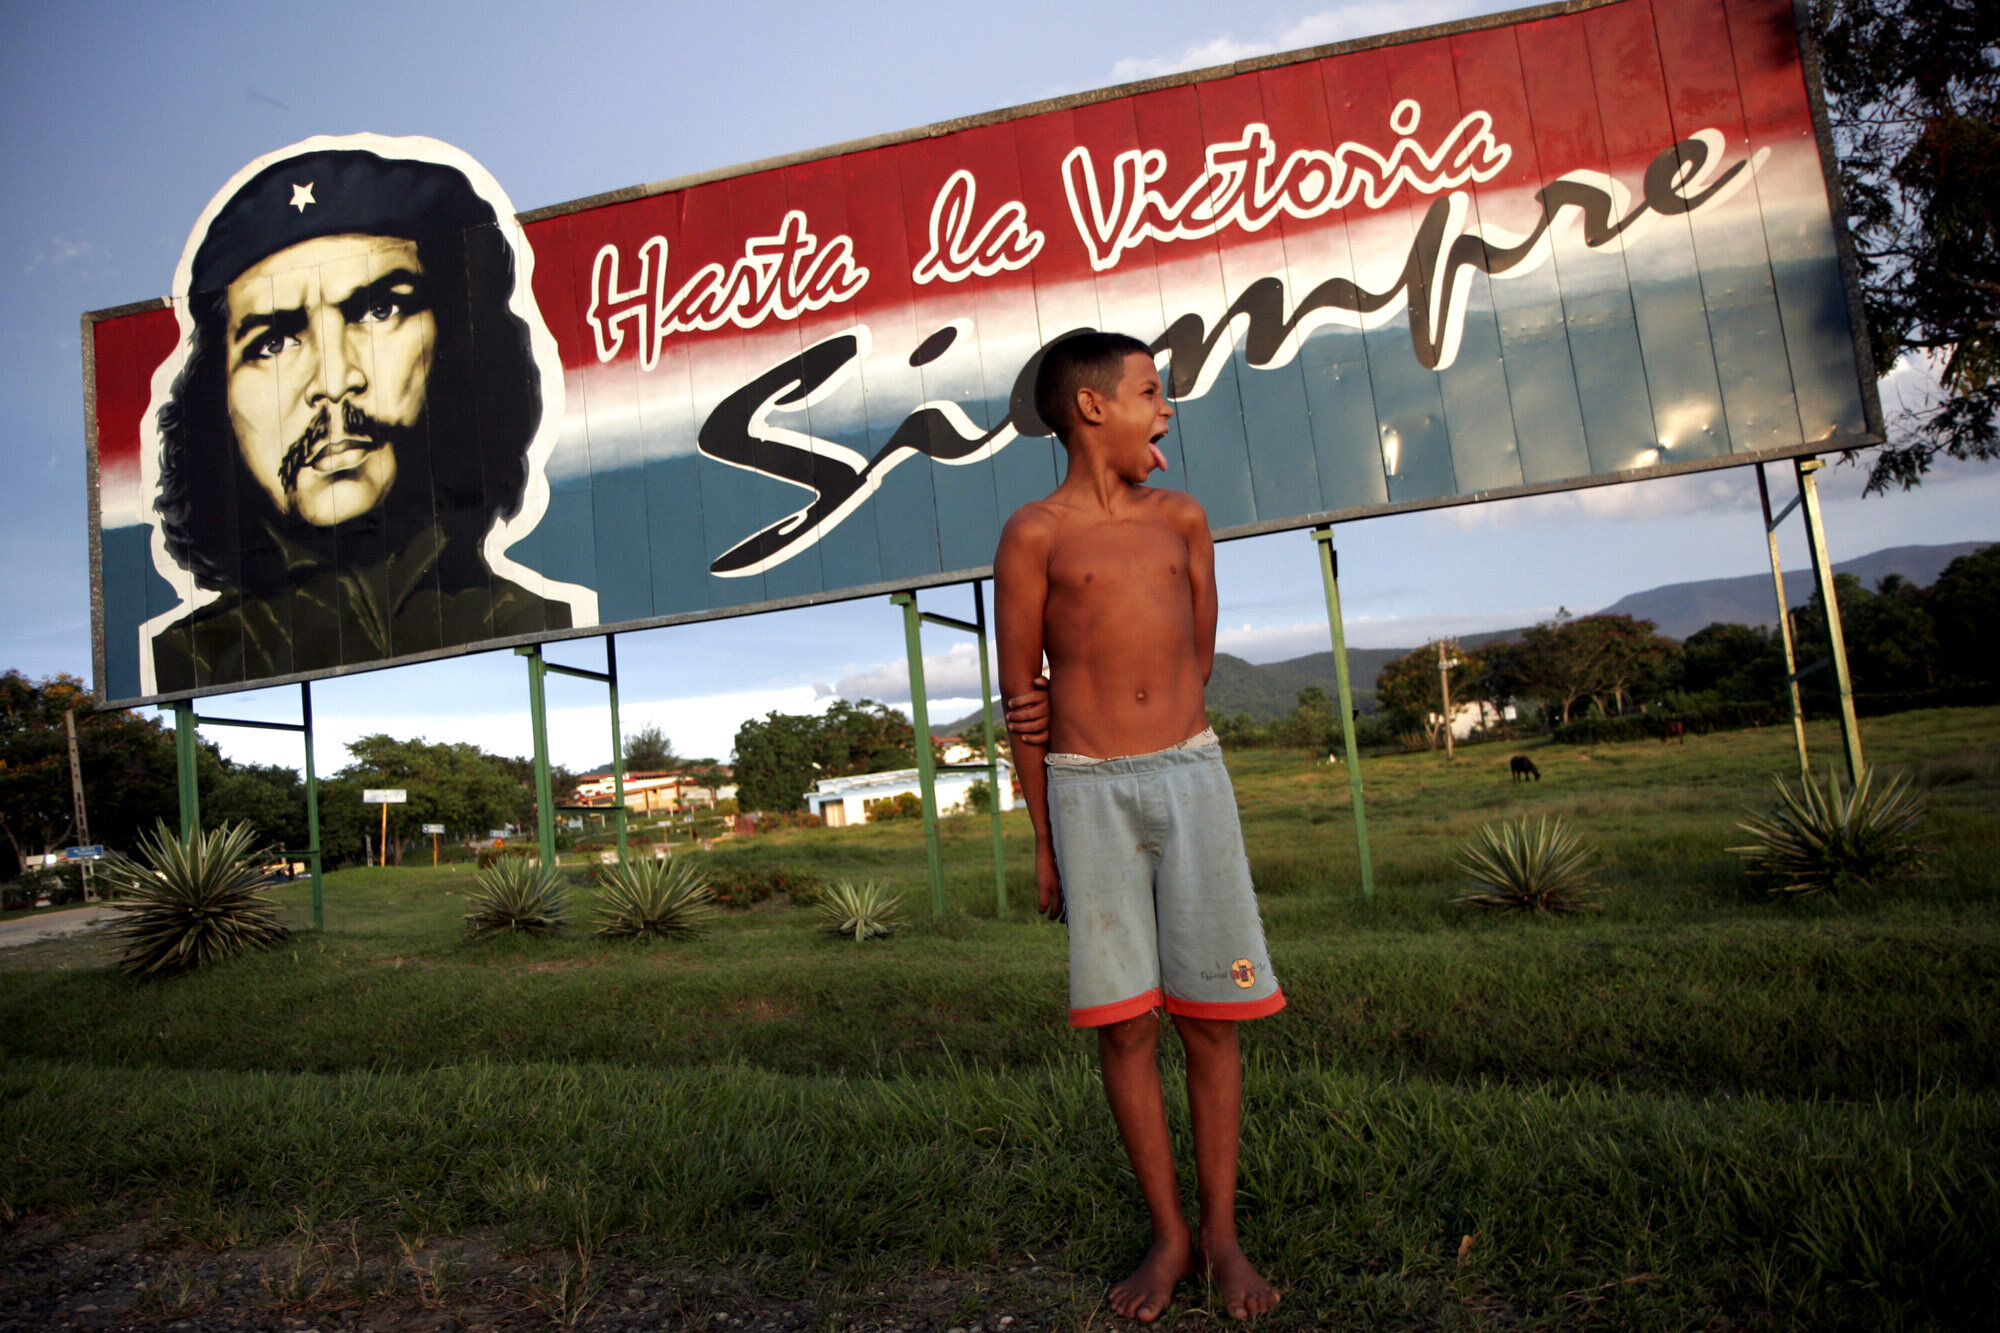  A cuban boy jokes with a friend as he stands under an image of late guerilla fighter Che Guevara in Biran, Fidel Casro's birthplace. Words read the most famous sentence written by Che Guevara: Hasta la Victoria Siempre (Until Victory, forever). 2007